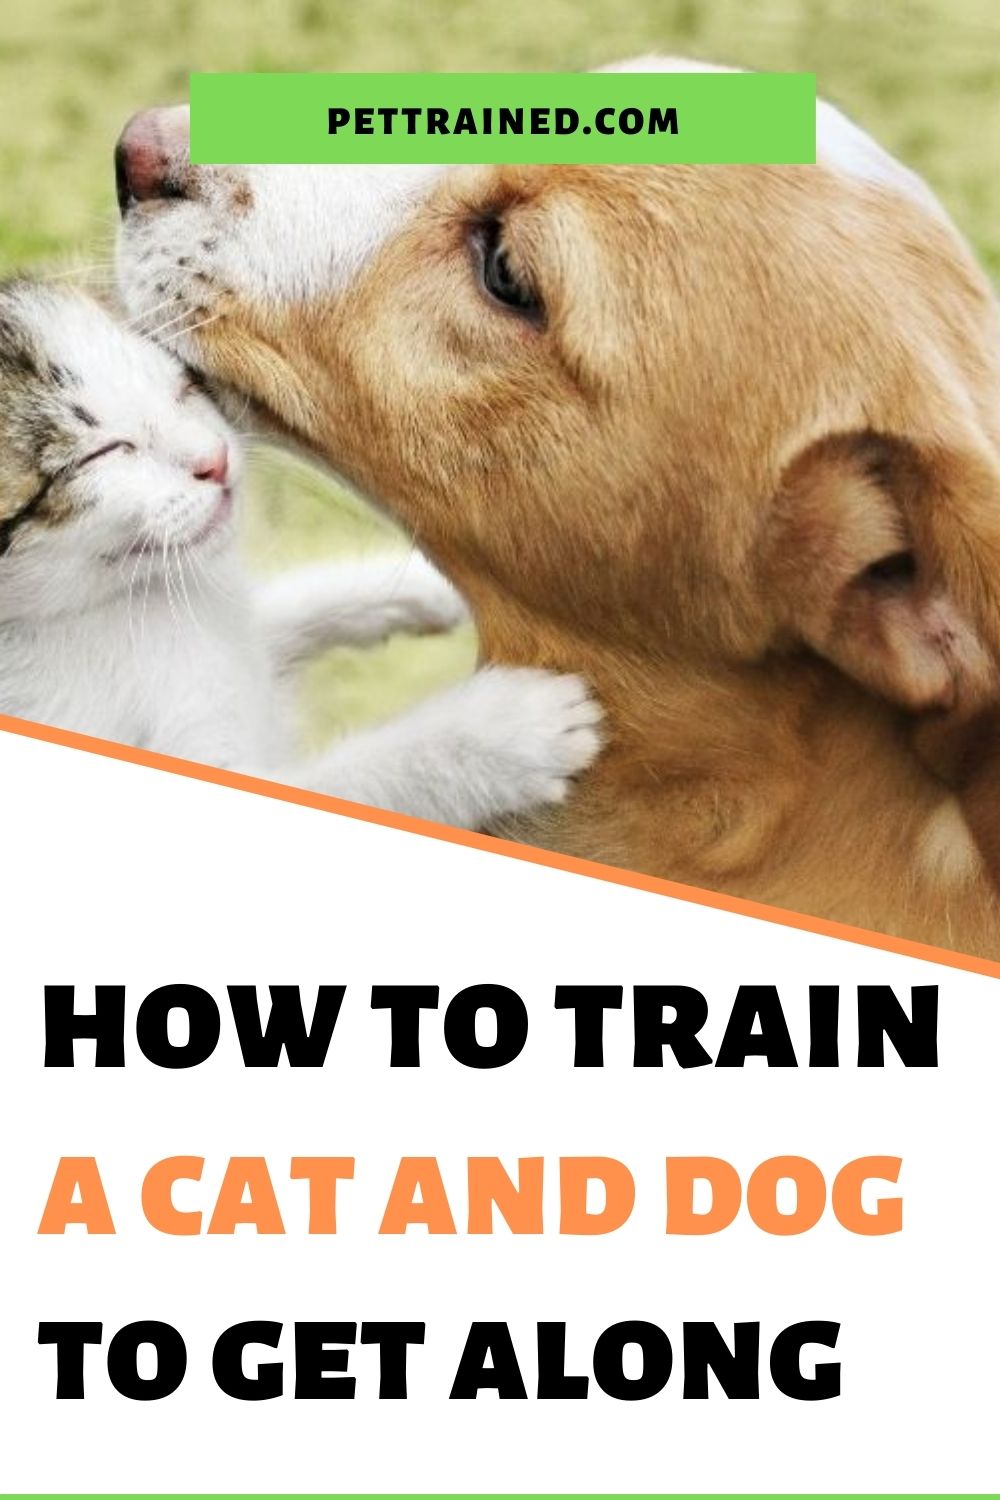 teach dog and cat to like each other